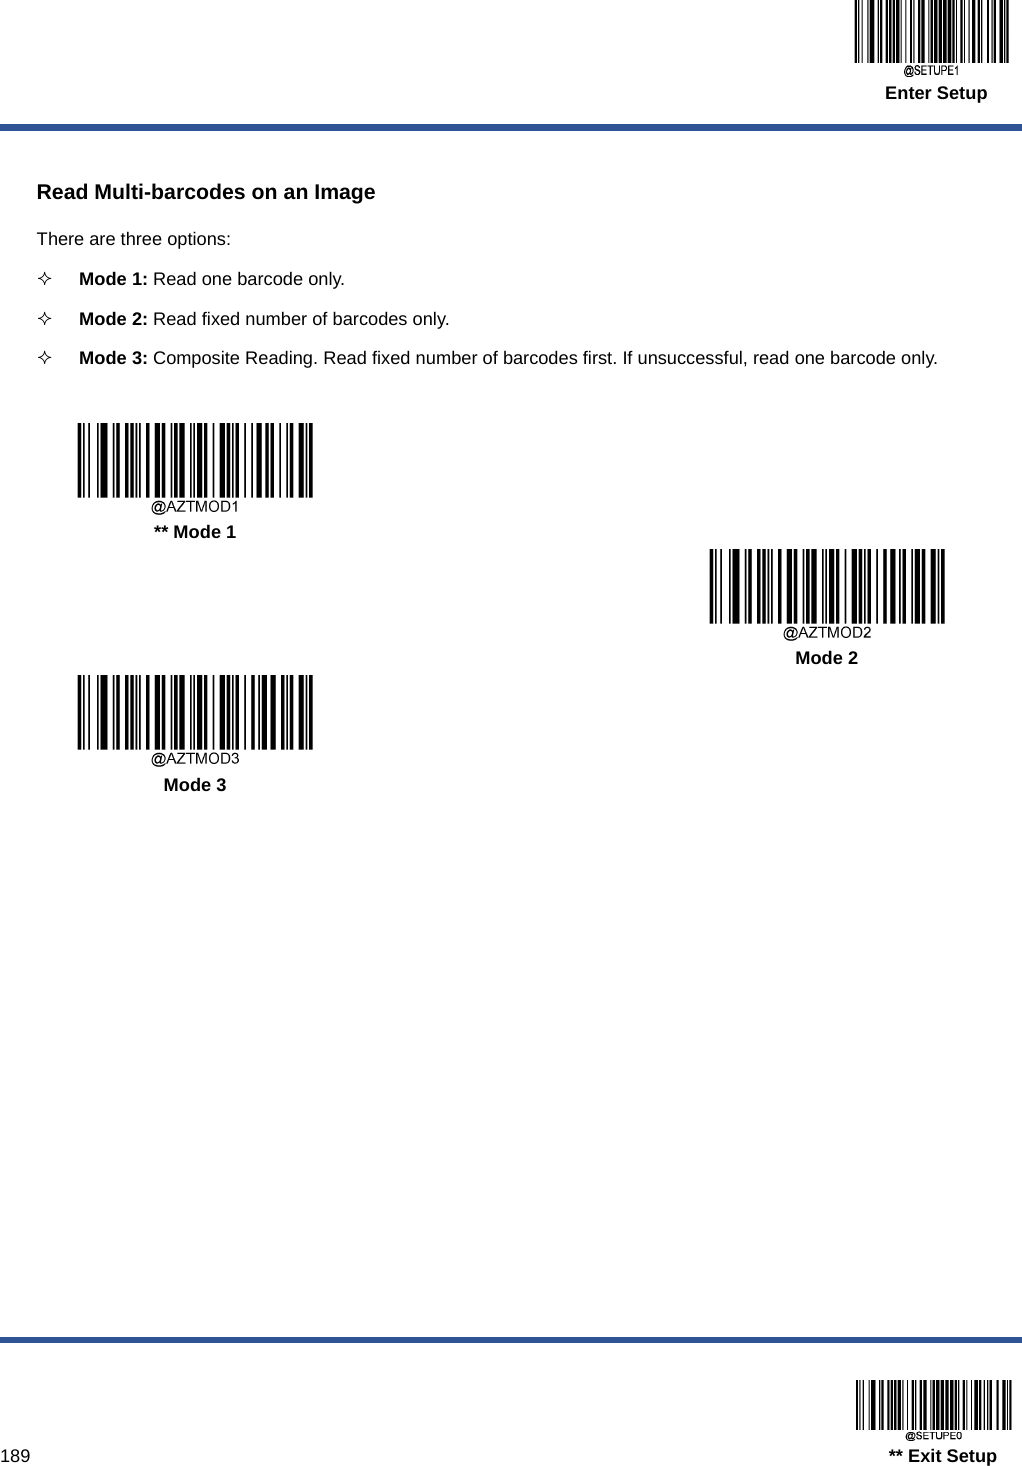  Enter Setup  189                                                                                   ** Exit Setup  Read Multi-barcodes on an Image There are three options:  Mode 1: Read one barcode only.  Mode 2: Read fixed number of barcodes only.  Mode 3: Composite Reading. Read fixed number of barcodes first. If unsuccessful, read one barcode only.     ** Mode 1      Mode 2  Mode 3     